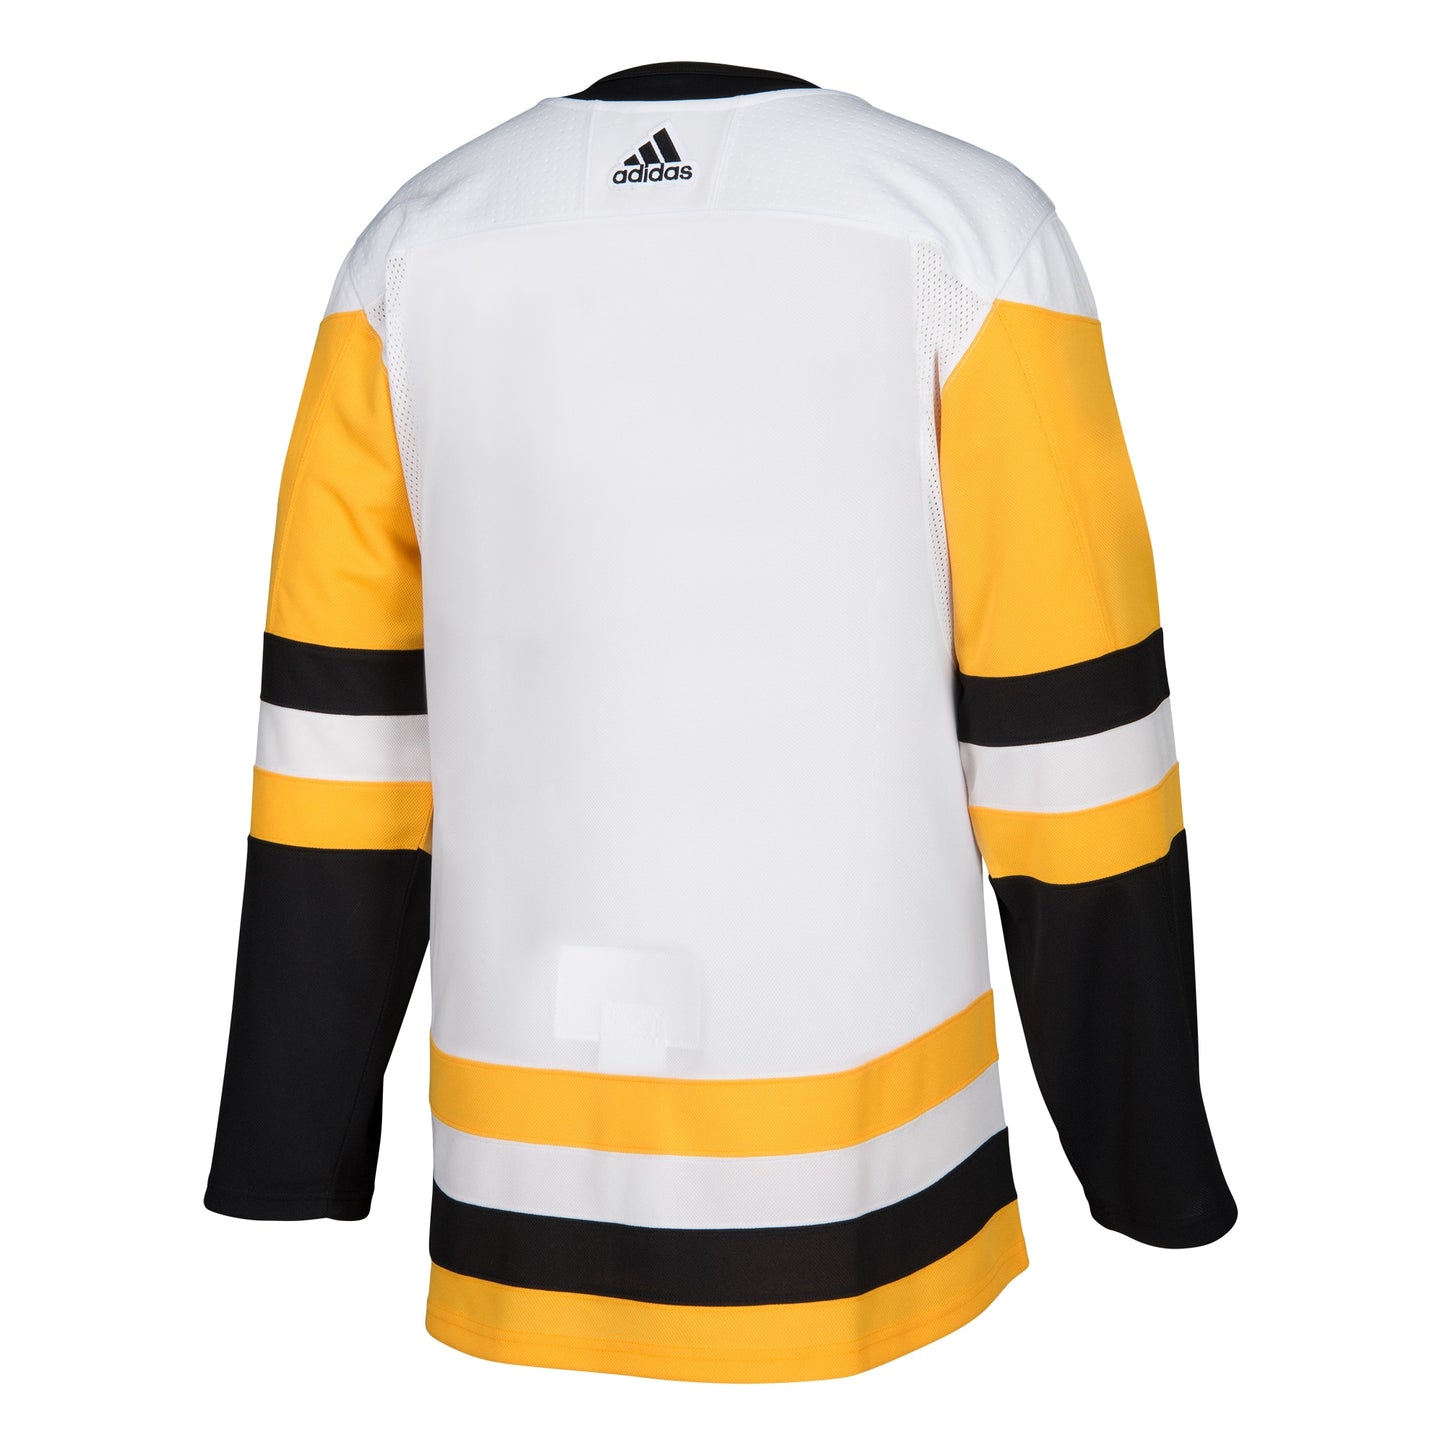 Pittsburgh Penguins adidas Away Authentic Blank Jersey - White